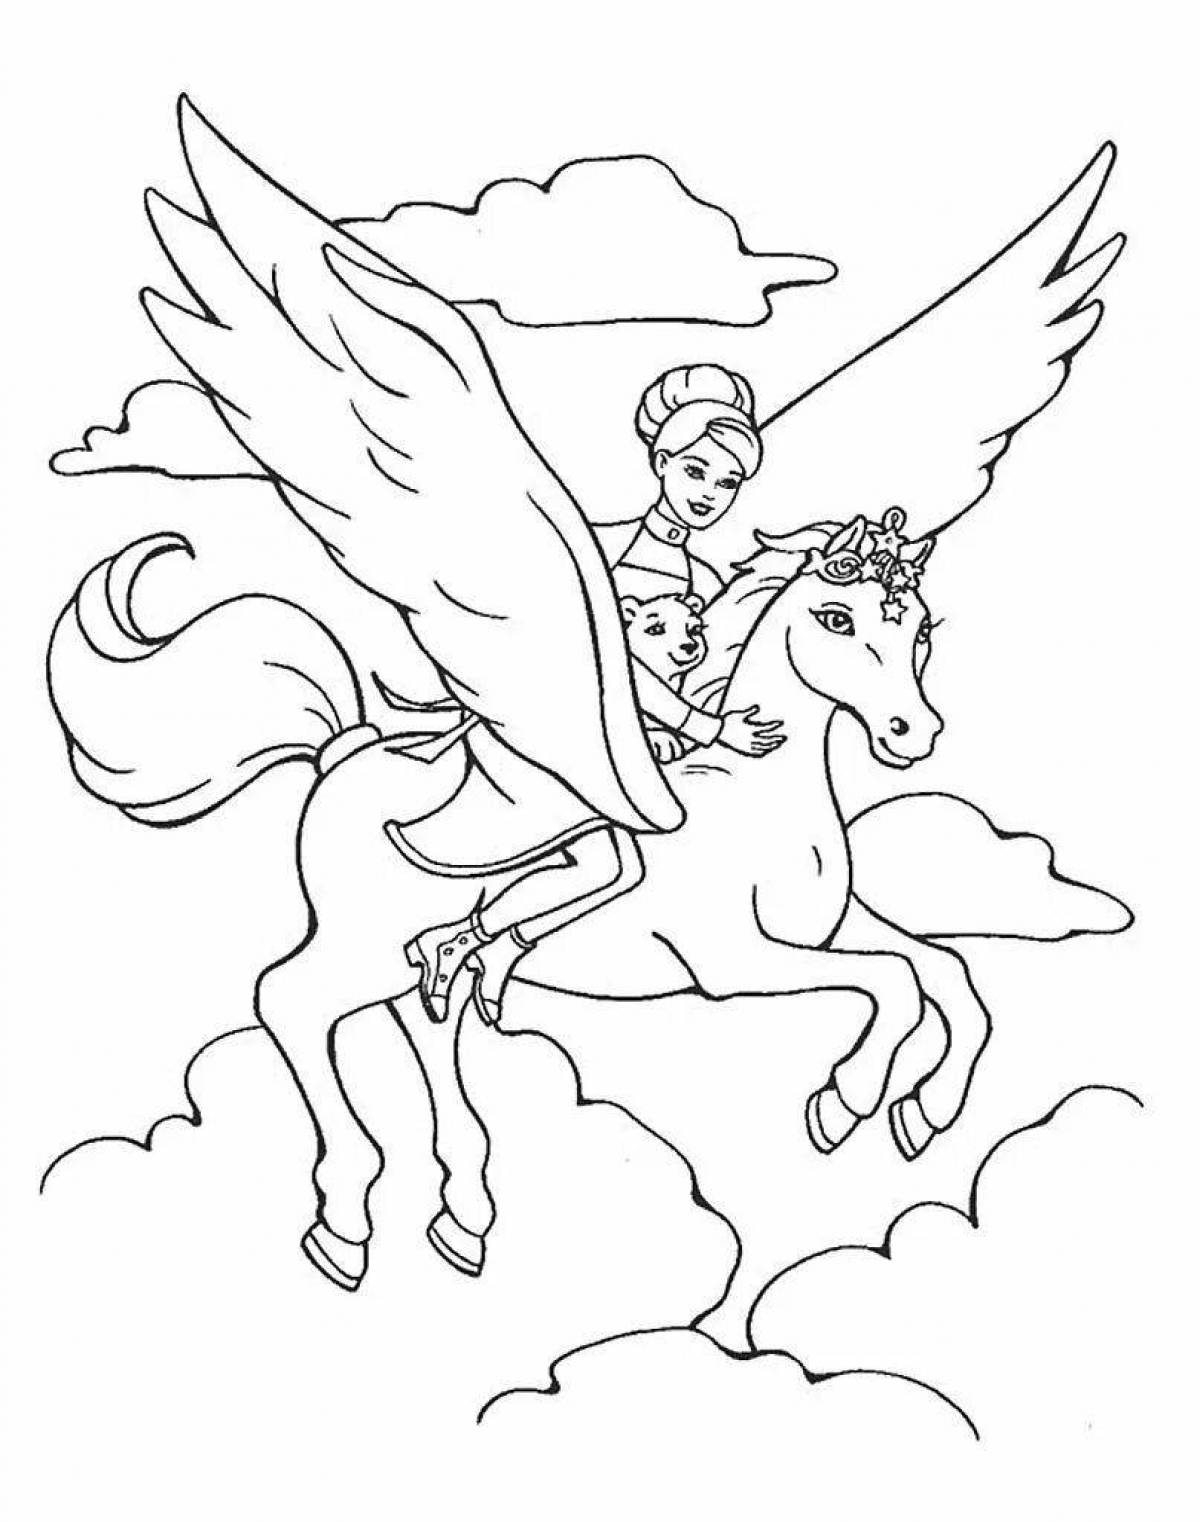 Colorful barbie on a horse coloring book